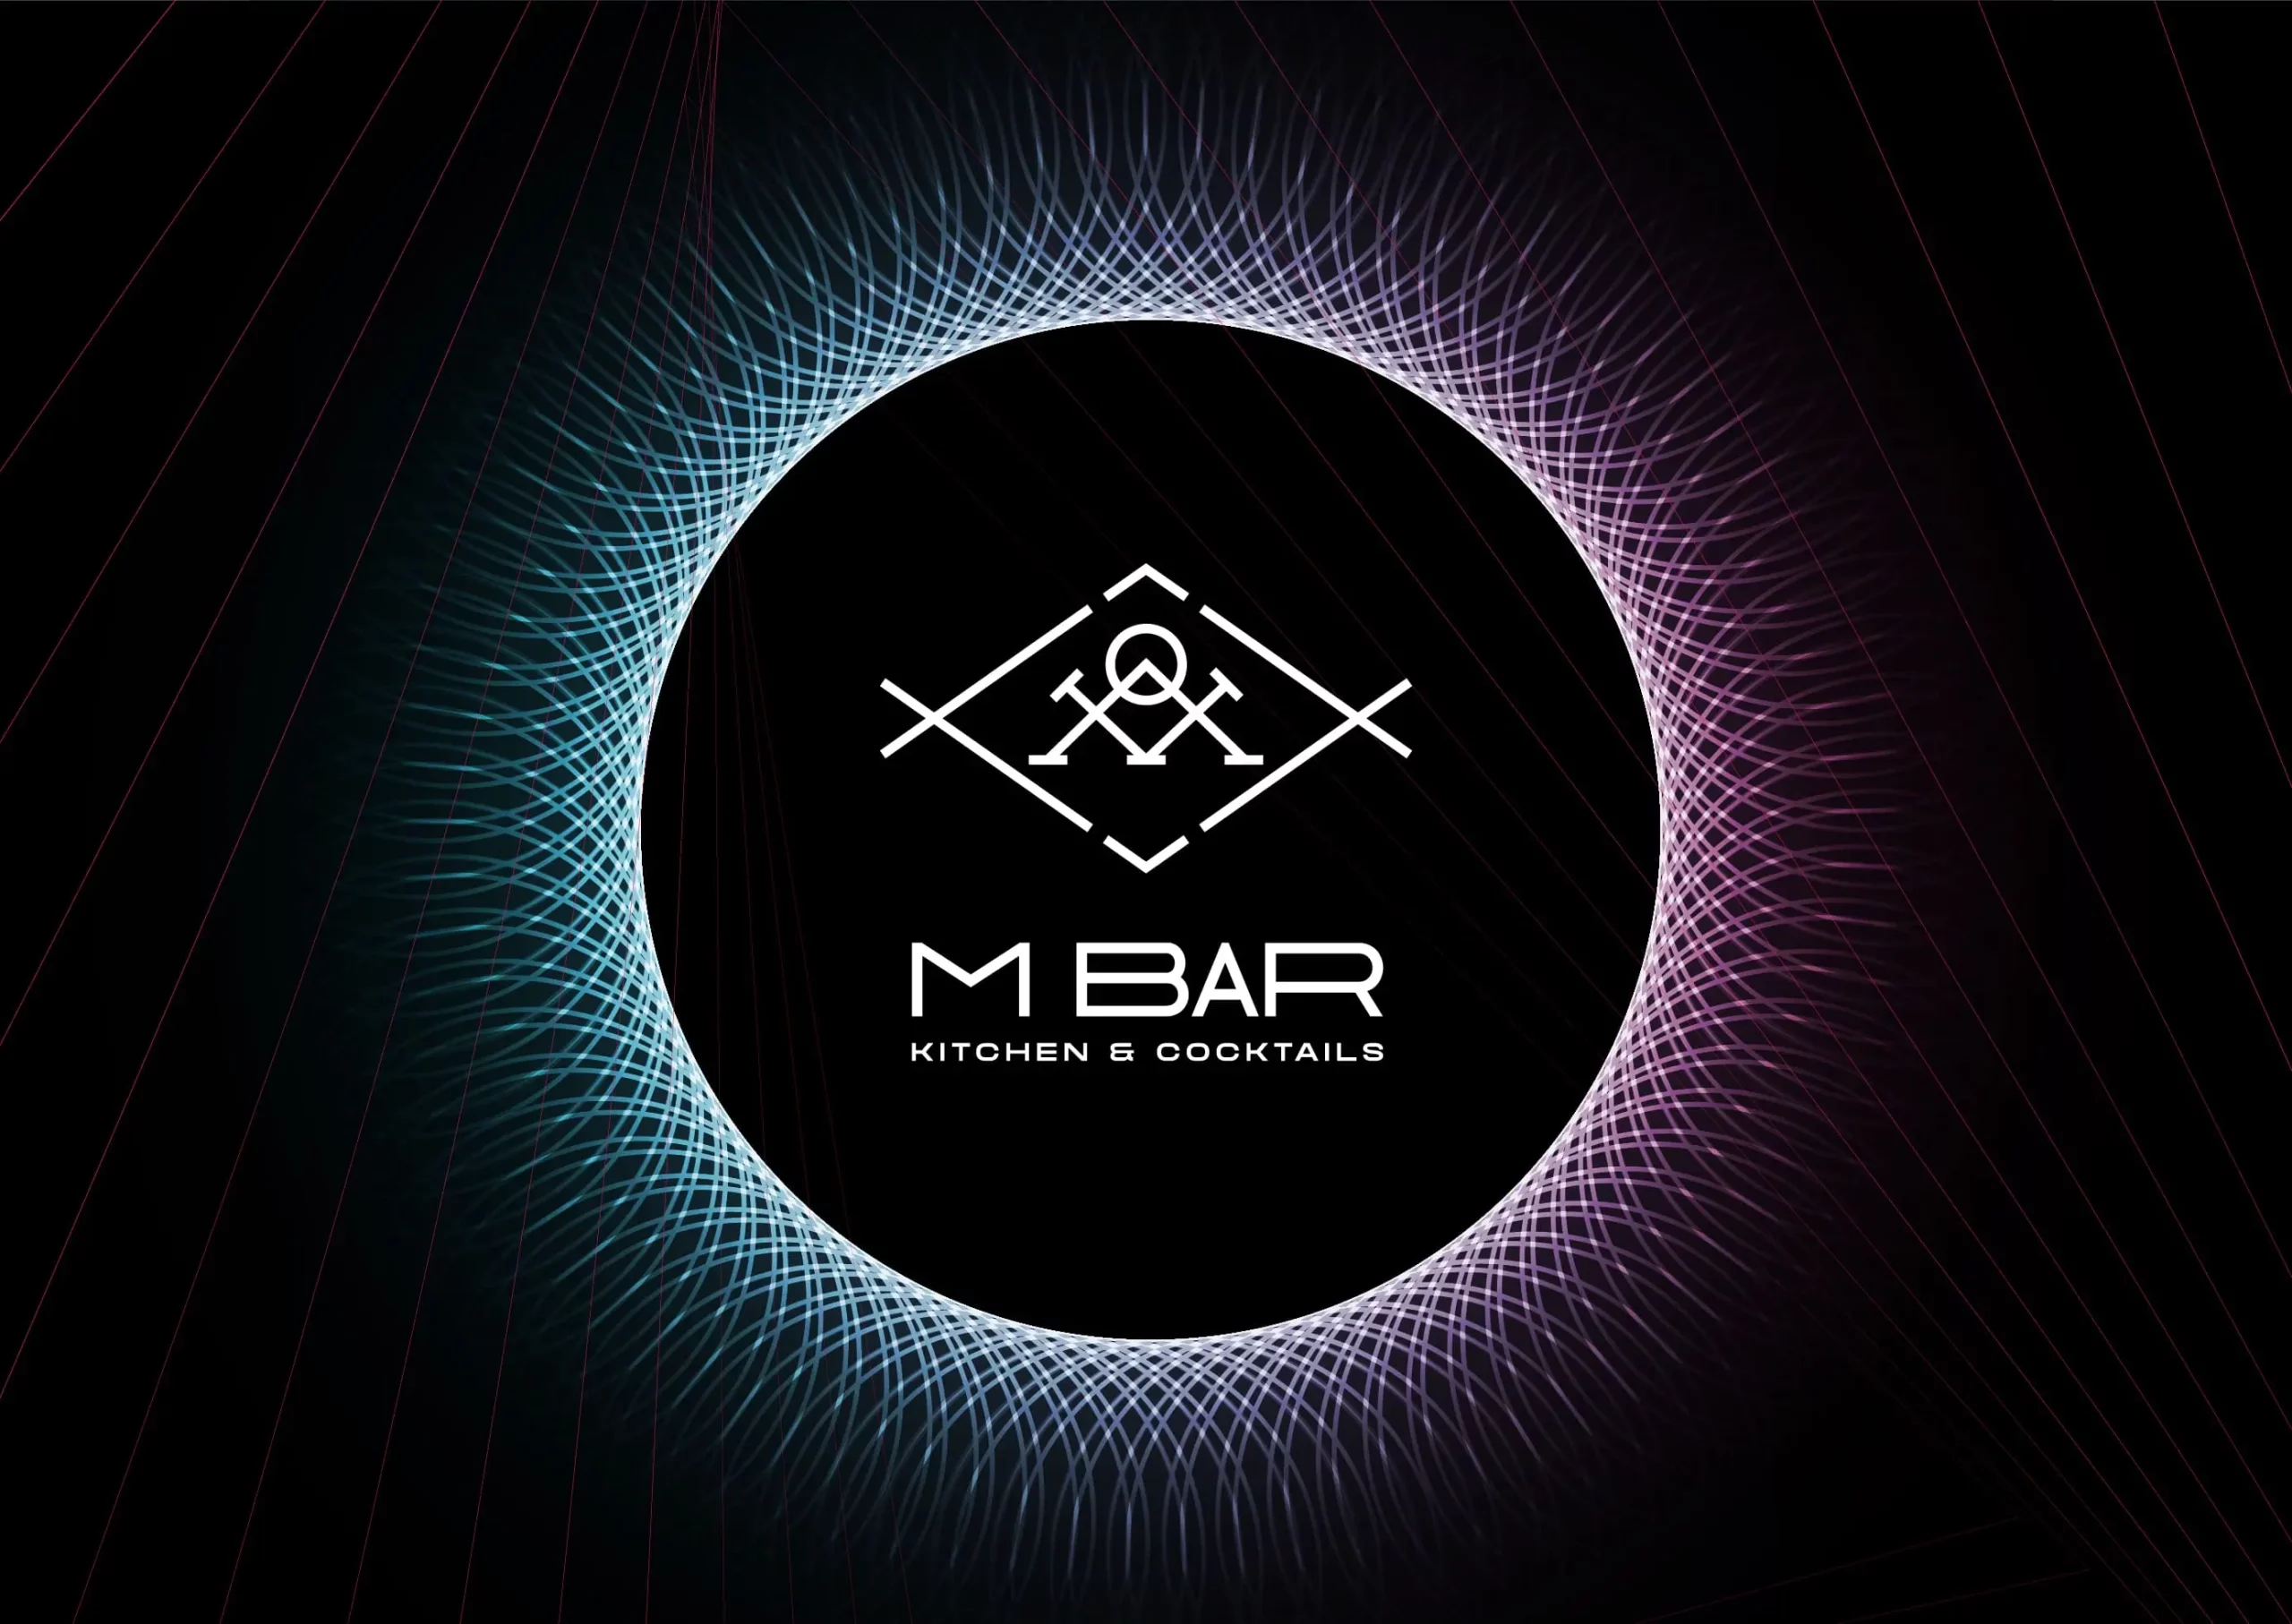 The logo for m bar on a black background.